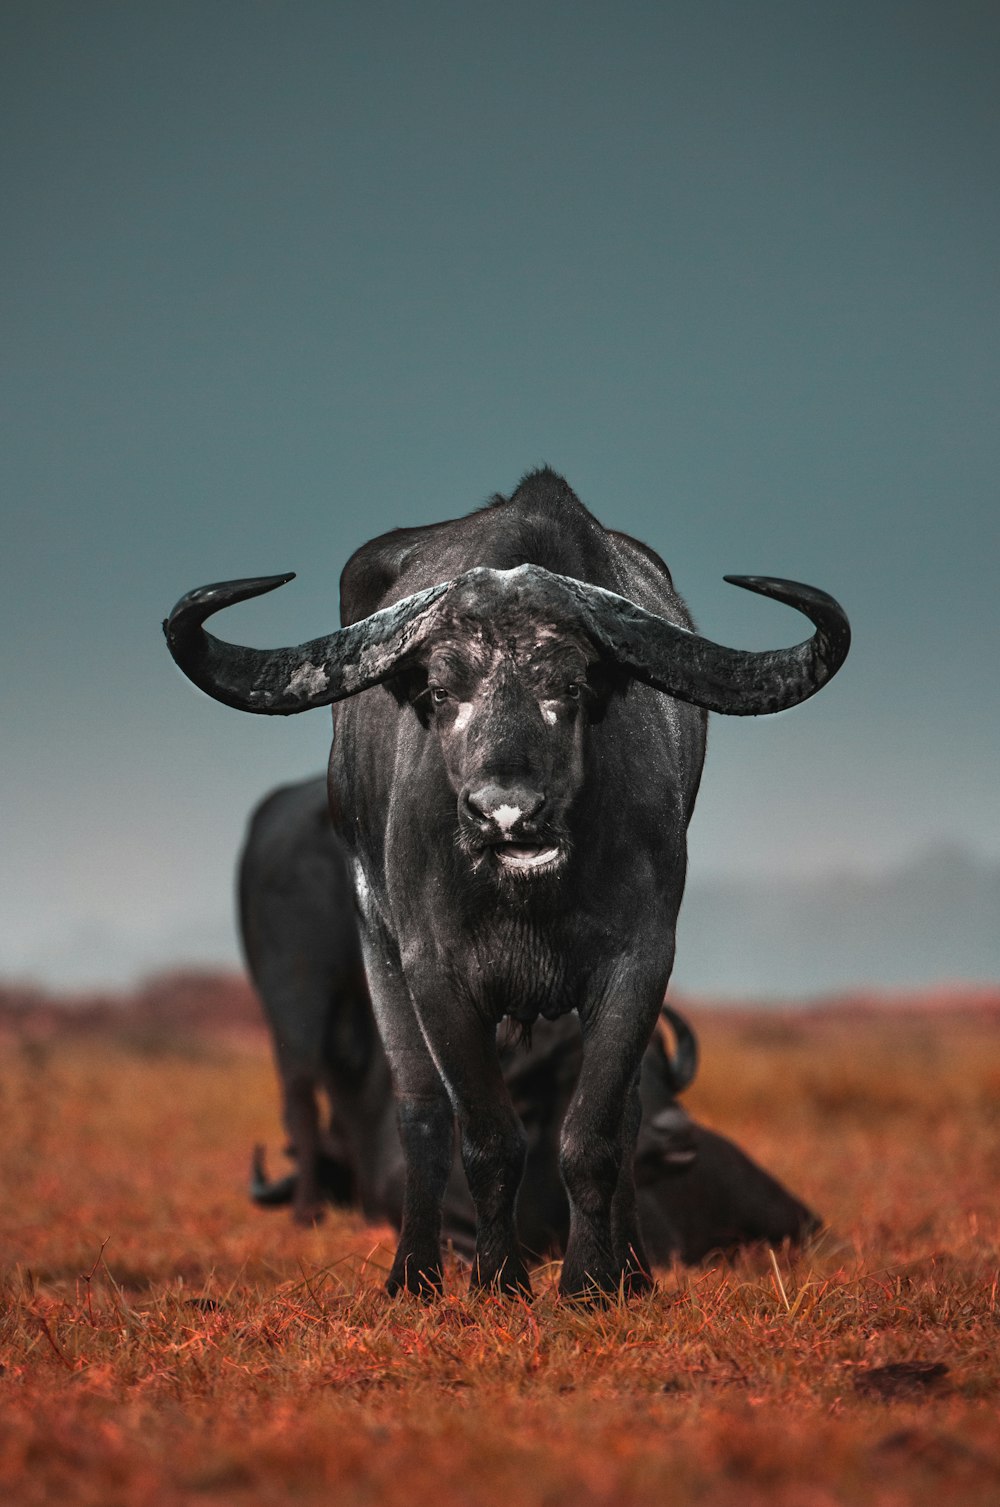 20+ Buffalo Images | Download Free Pictures on Unsplash